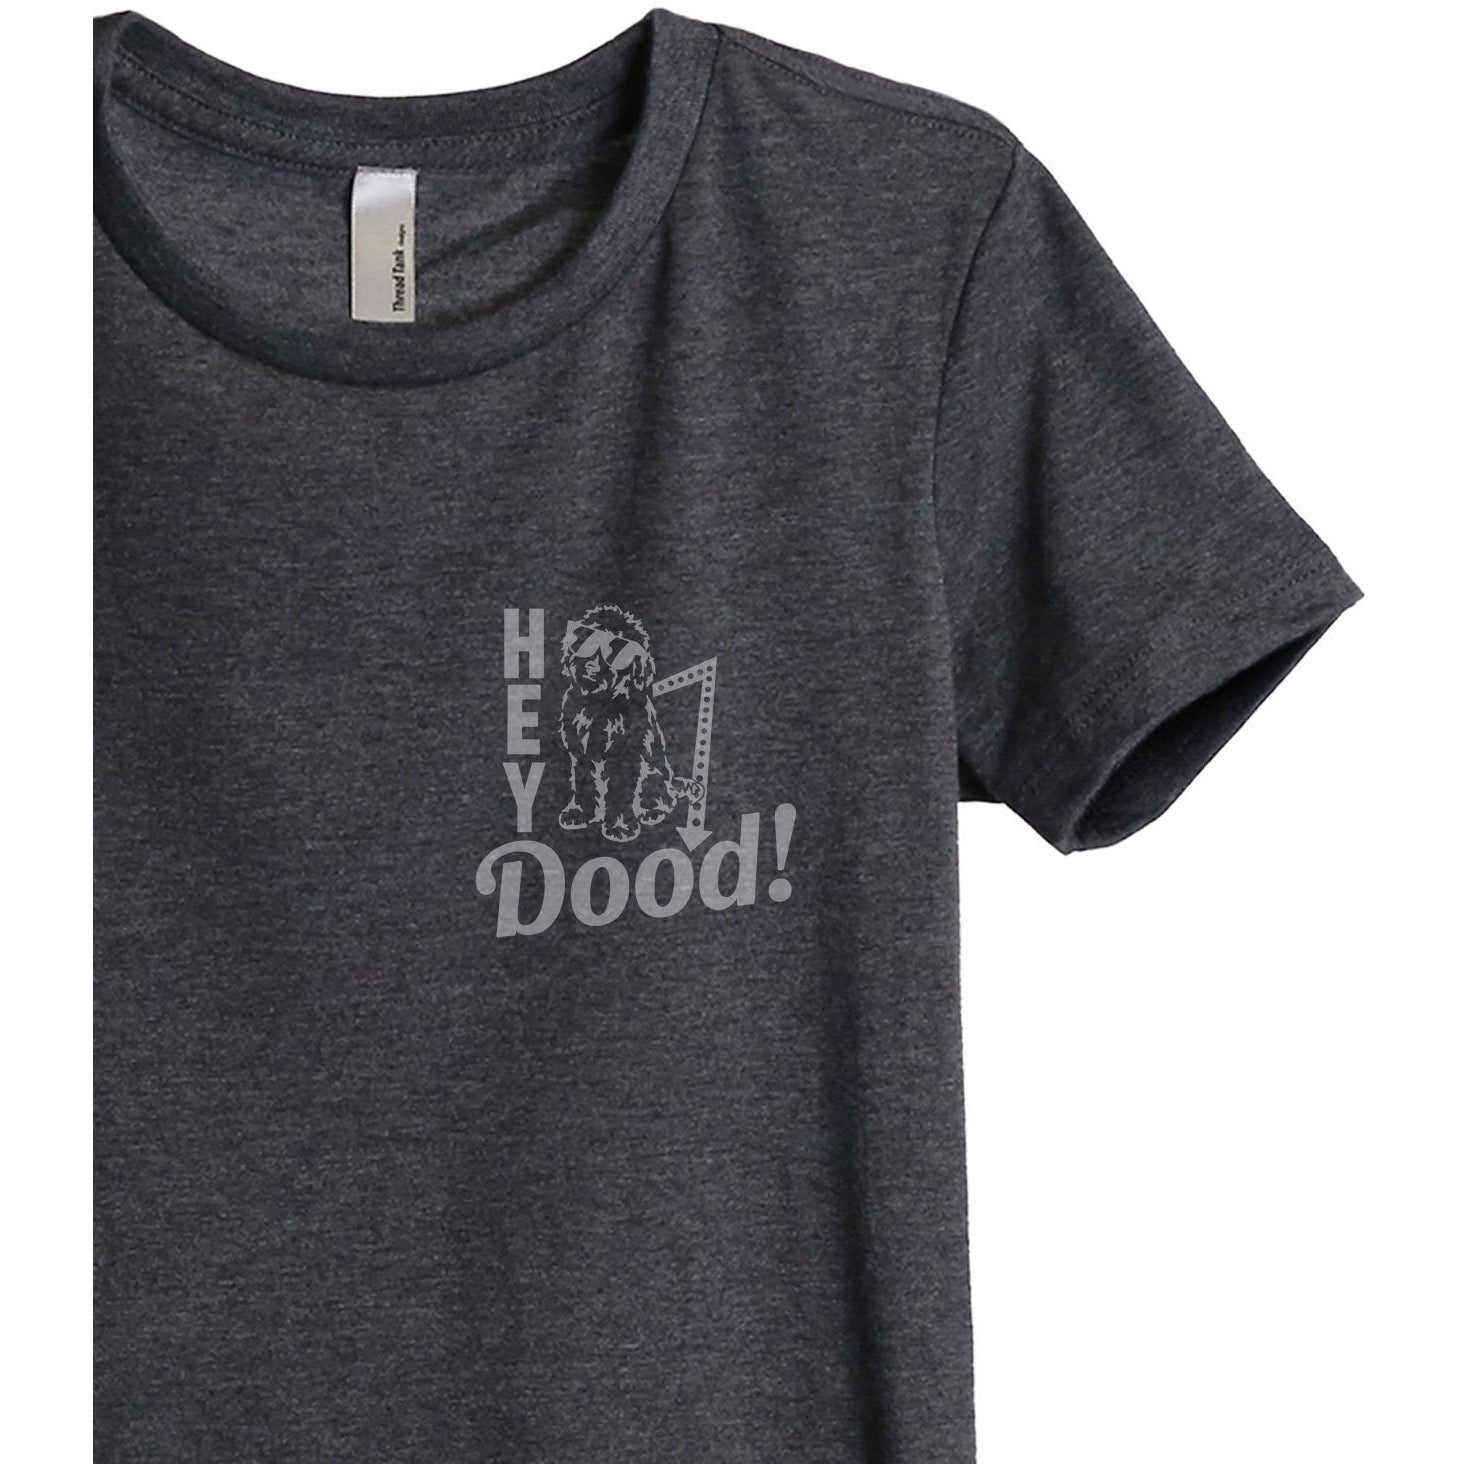 Hey Doodle Dog Women's Relaxed Crewneck T-Shirt Top Tee Charcoal Grey Zoom Details